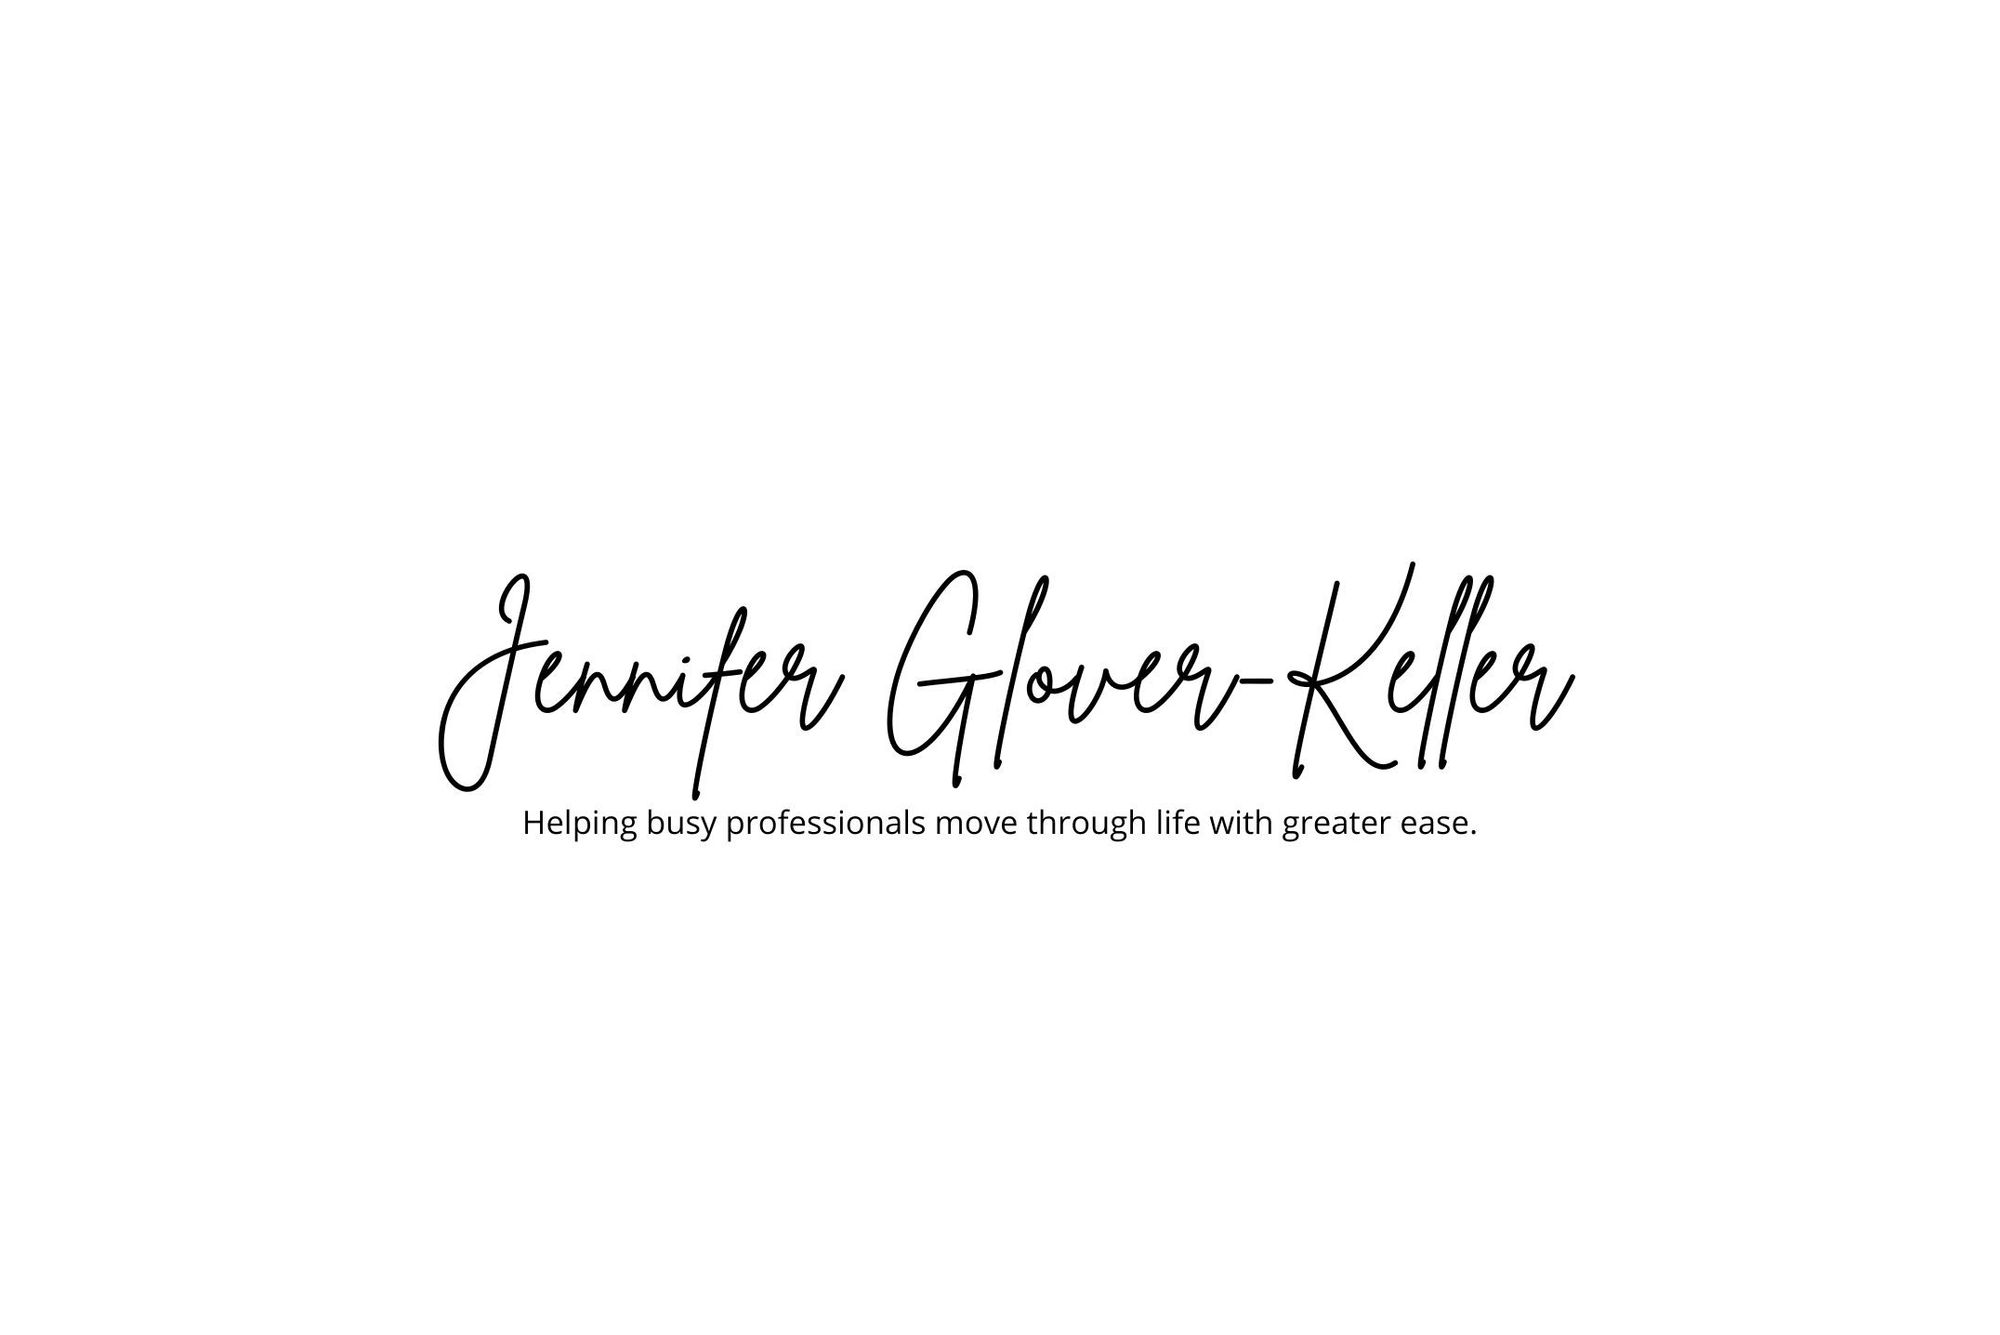 Move Through Life With Greater Ease - Jennifer Glover-Keller